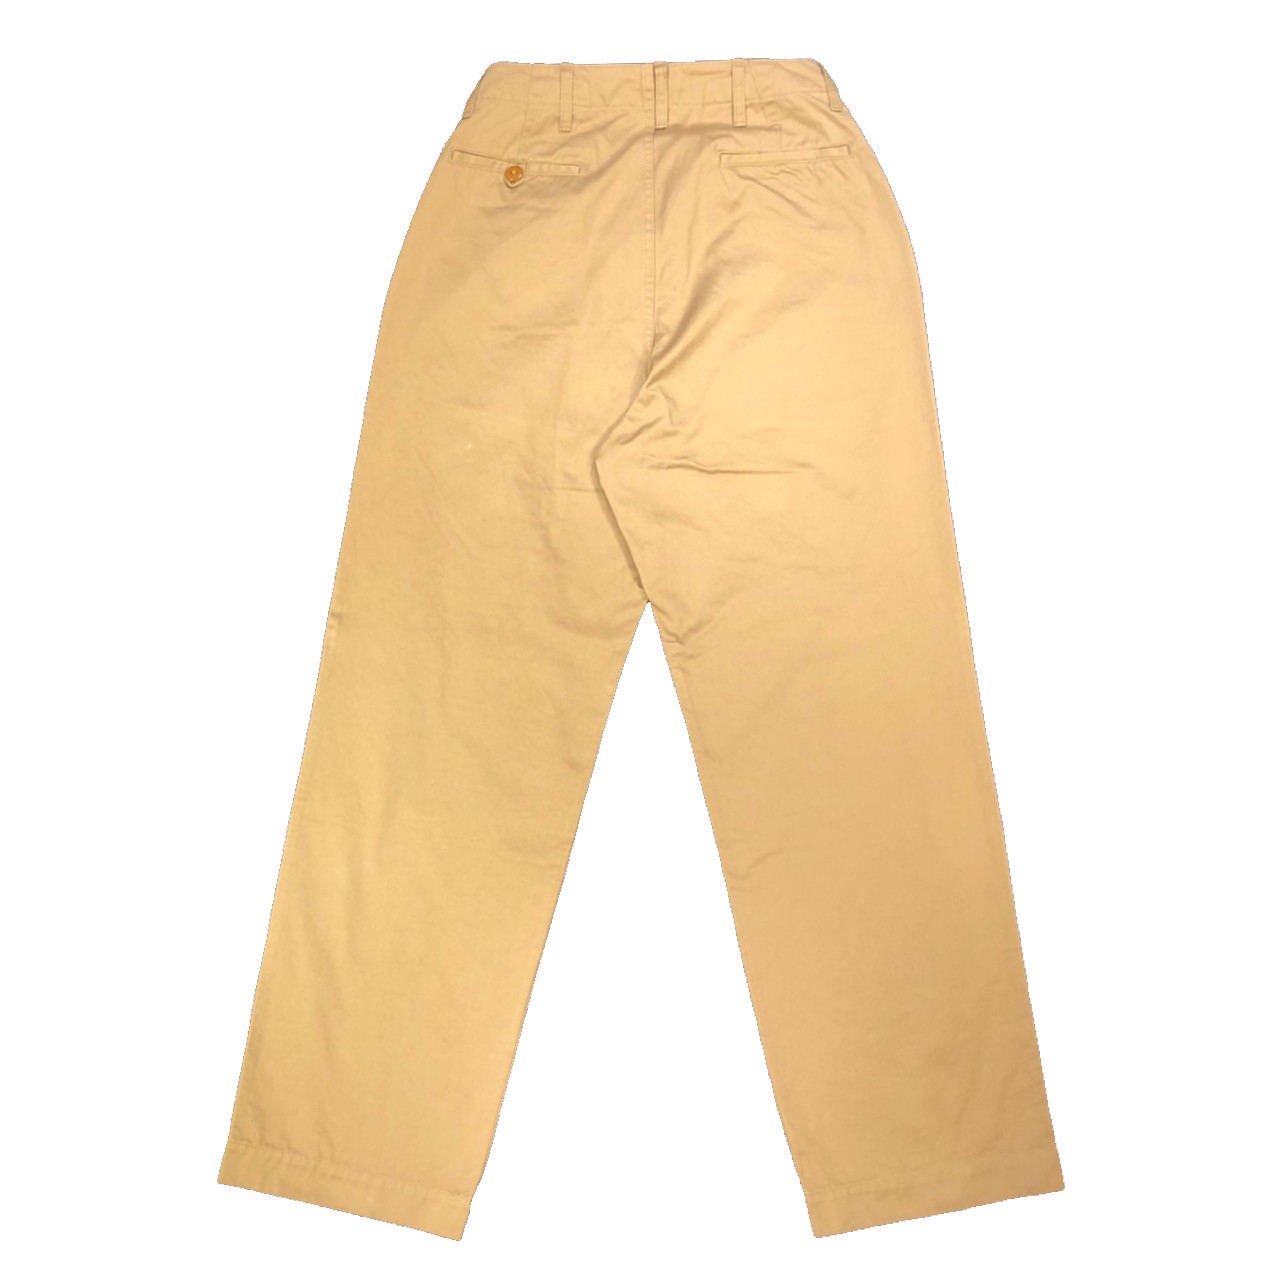 Hummingbirds'hill shop / Nigel Cabourn - BASIC CHINO WEST POINT PANT BEIGE